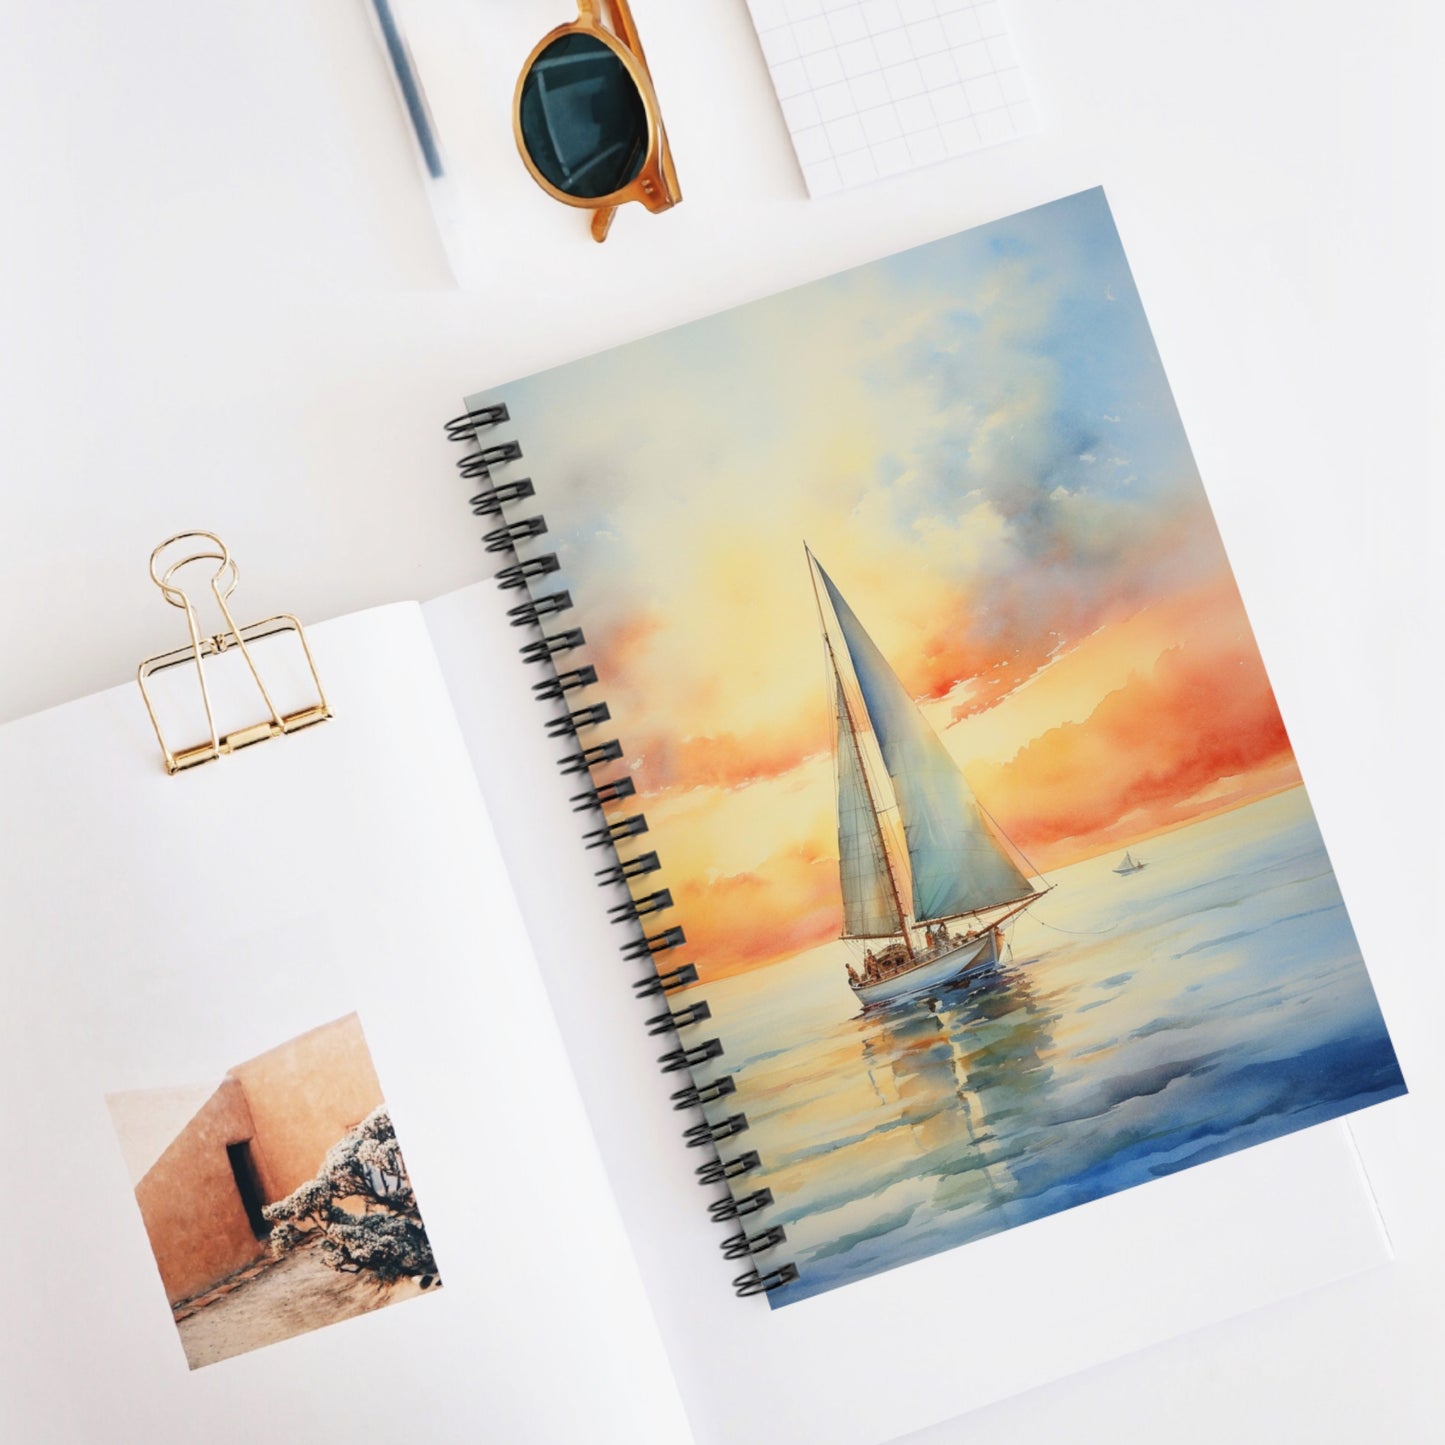 Sunset Sailing Spiral Notebook, Sail Boat Ocean Sea Travel Design Small Journal Notepad Ruled Line Book Paper Pad Work Aesthetic Gift Starcove Fashion